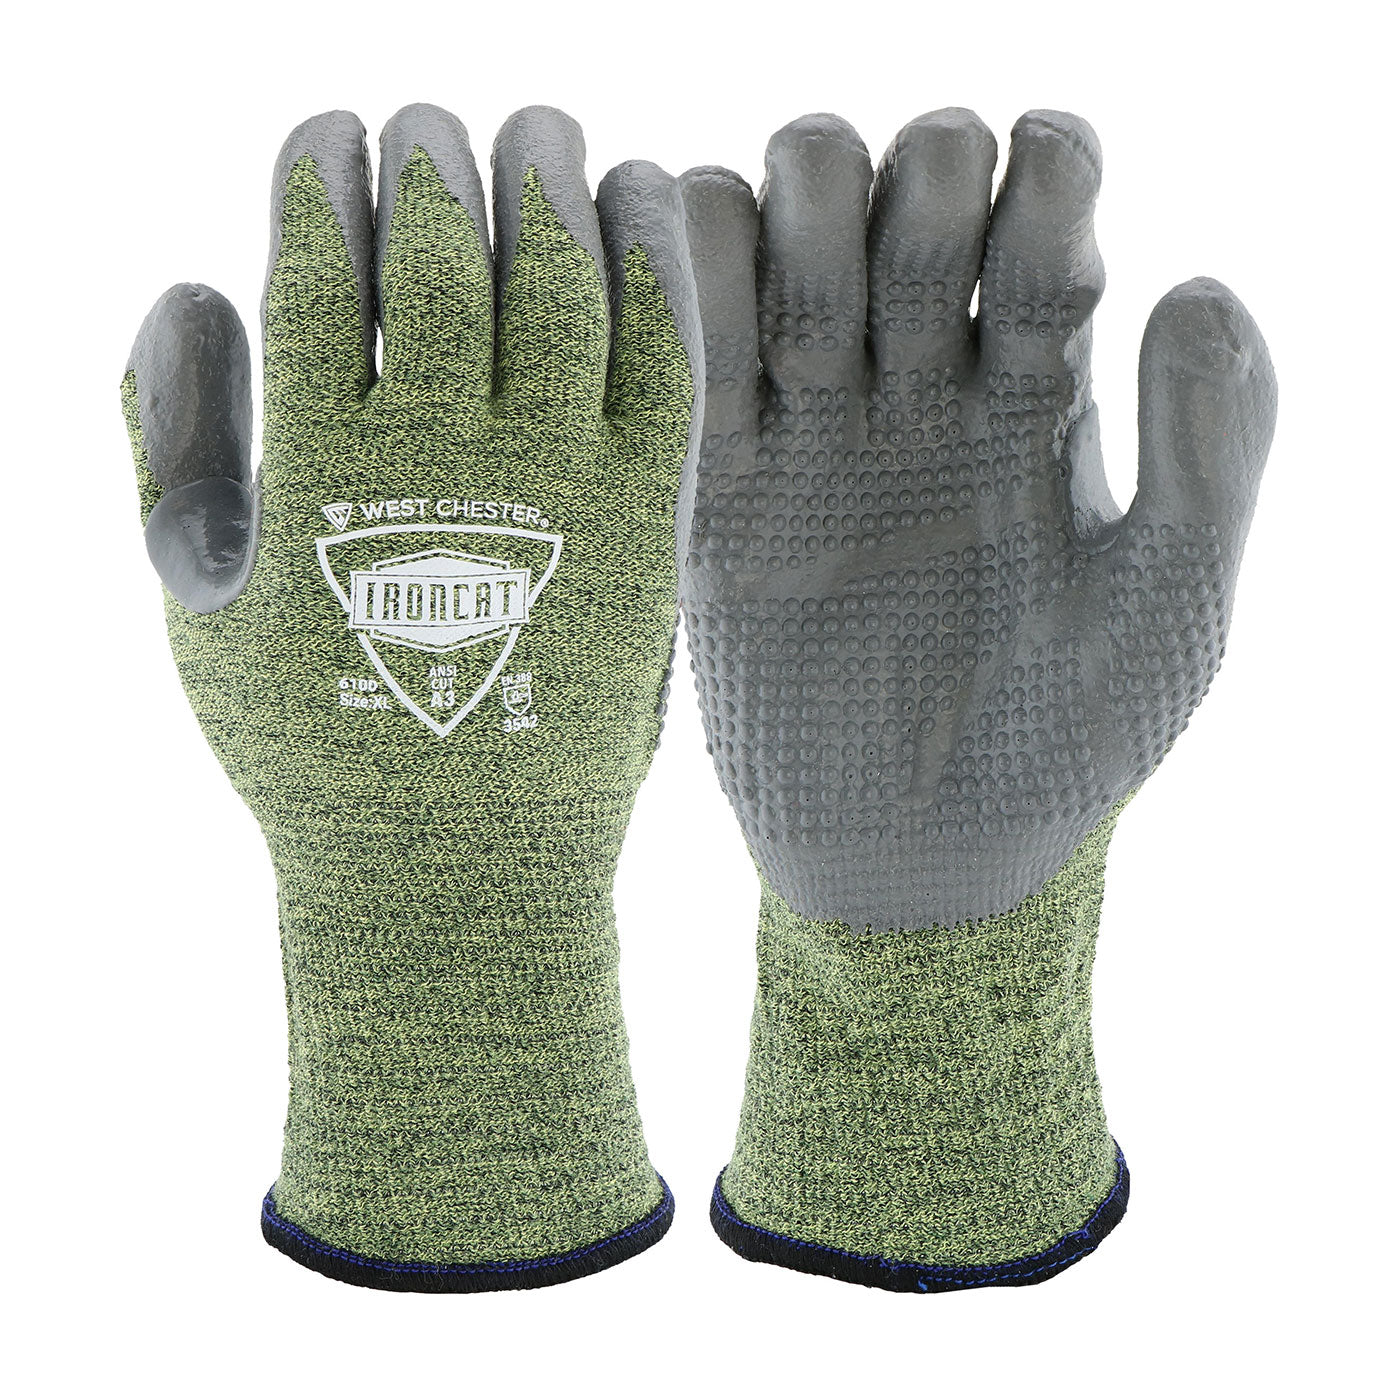 Flame Resistant Seamless Knit TIG Welder's Glove with Silicone Coating